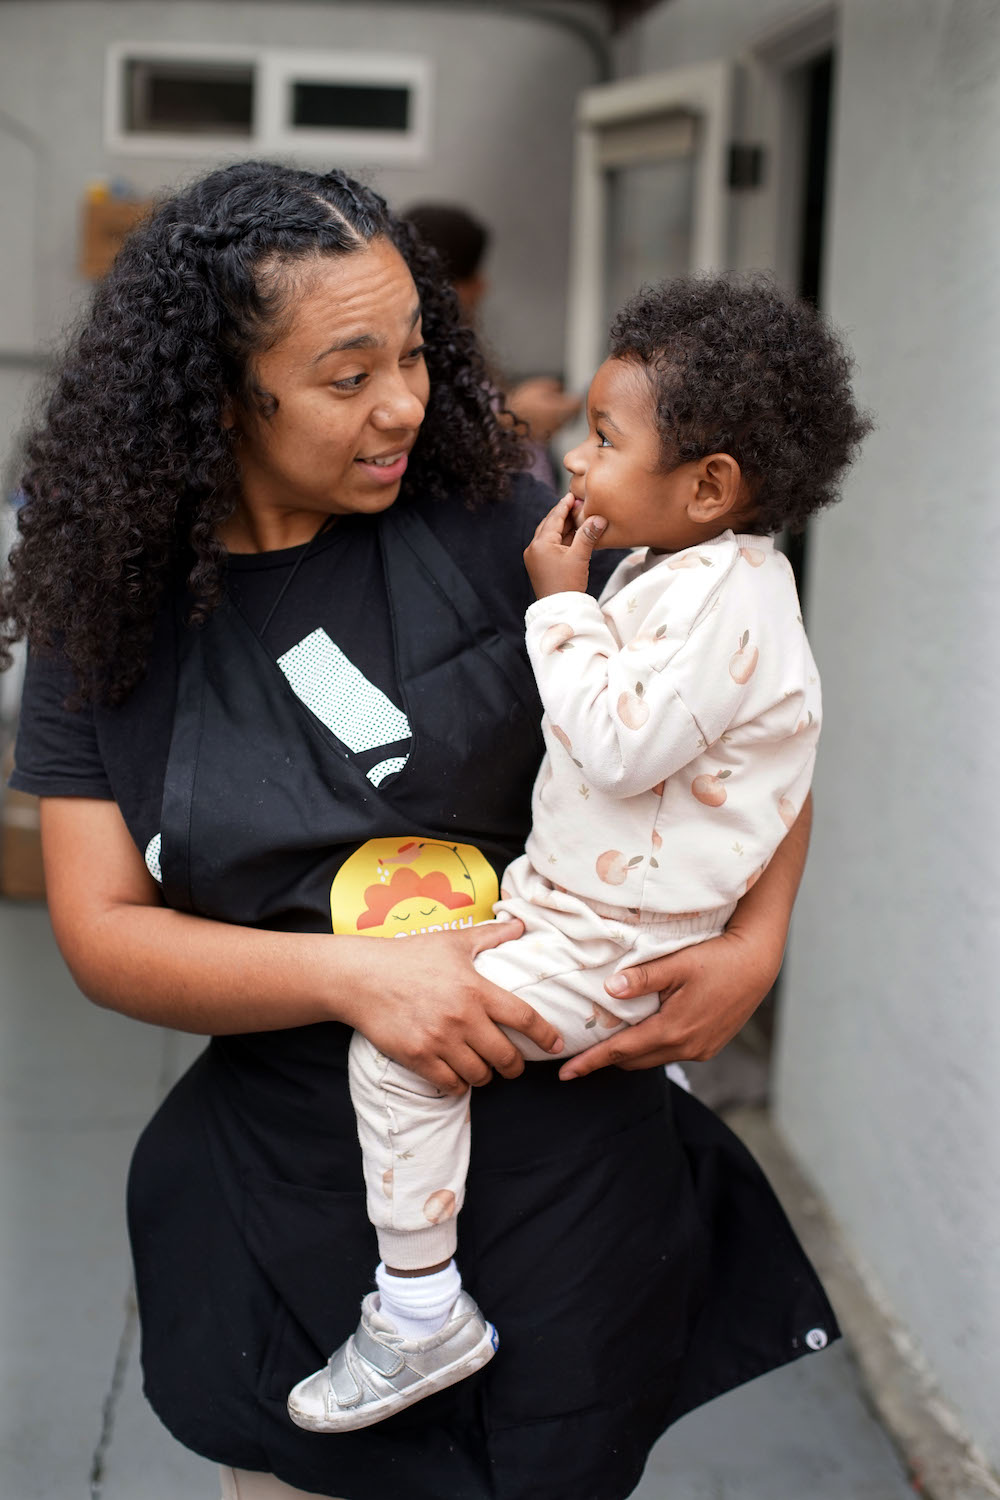 San Diego homeschool instructor Brianda Vargas has a chat with her daughter Lunita, 18 months, during the Flourish Homeschool co-op weekly gathering at a home in Clairemont. Several homeschooling families gather once or twice a week for community and shared lessons.